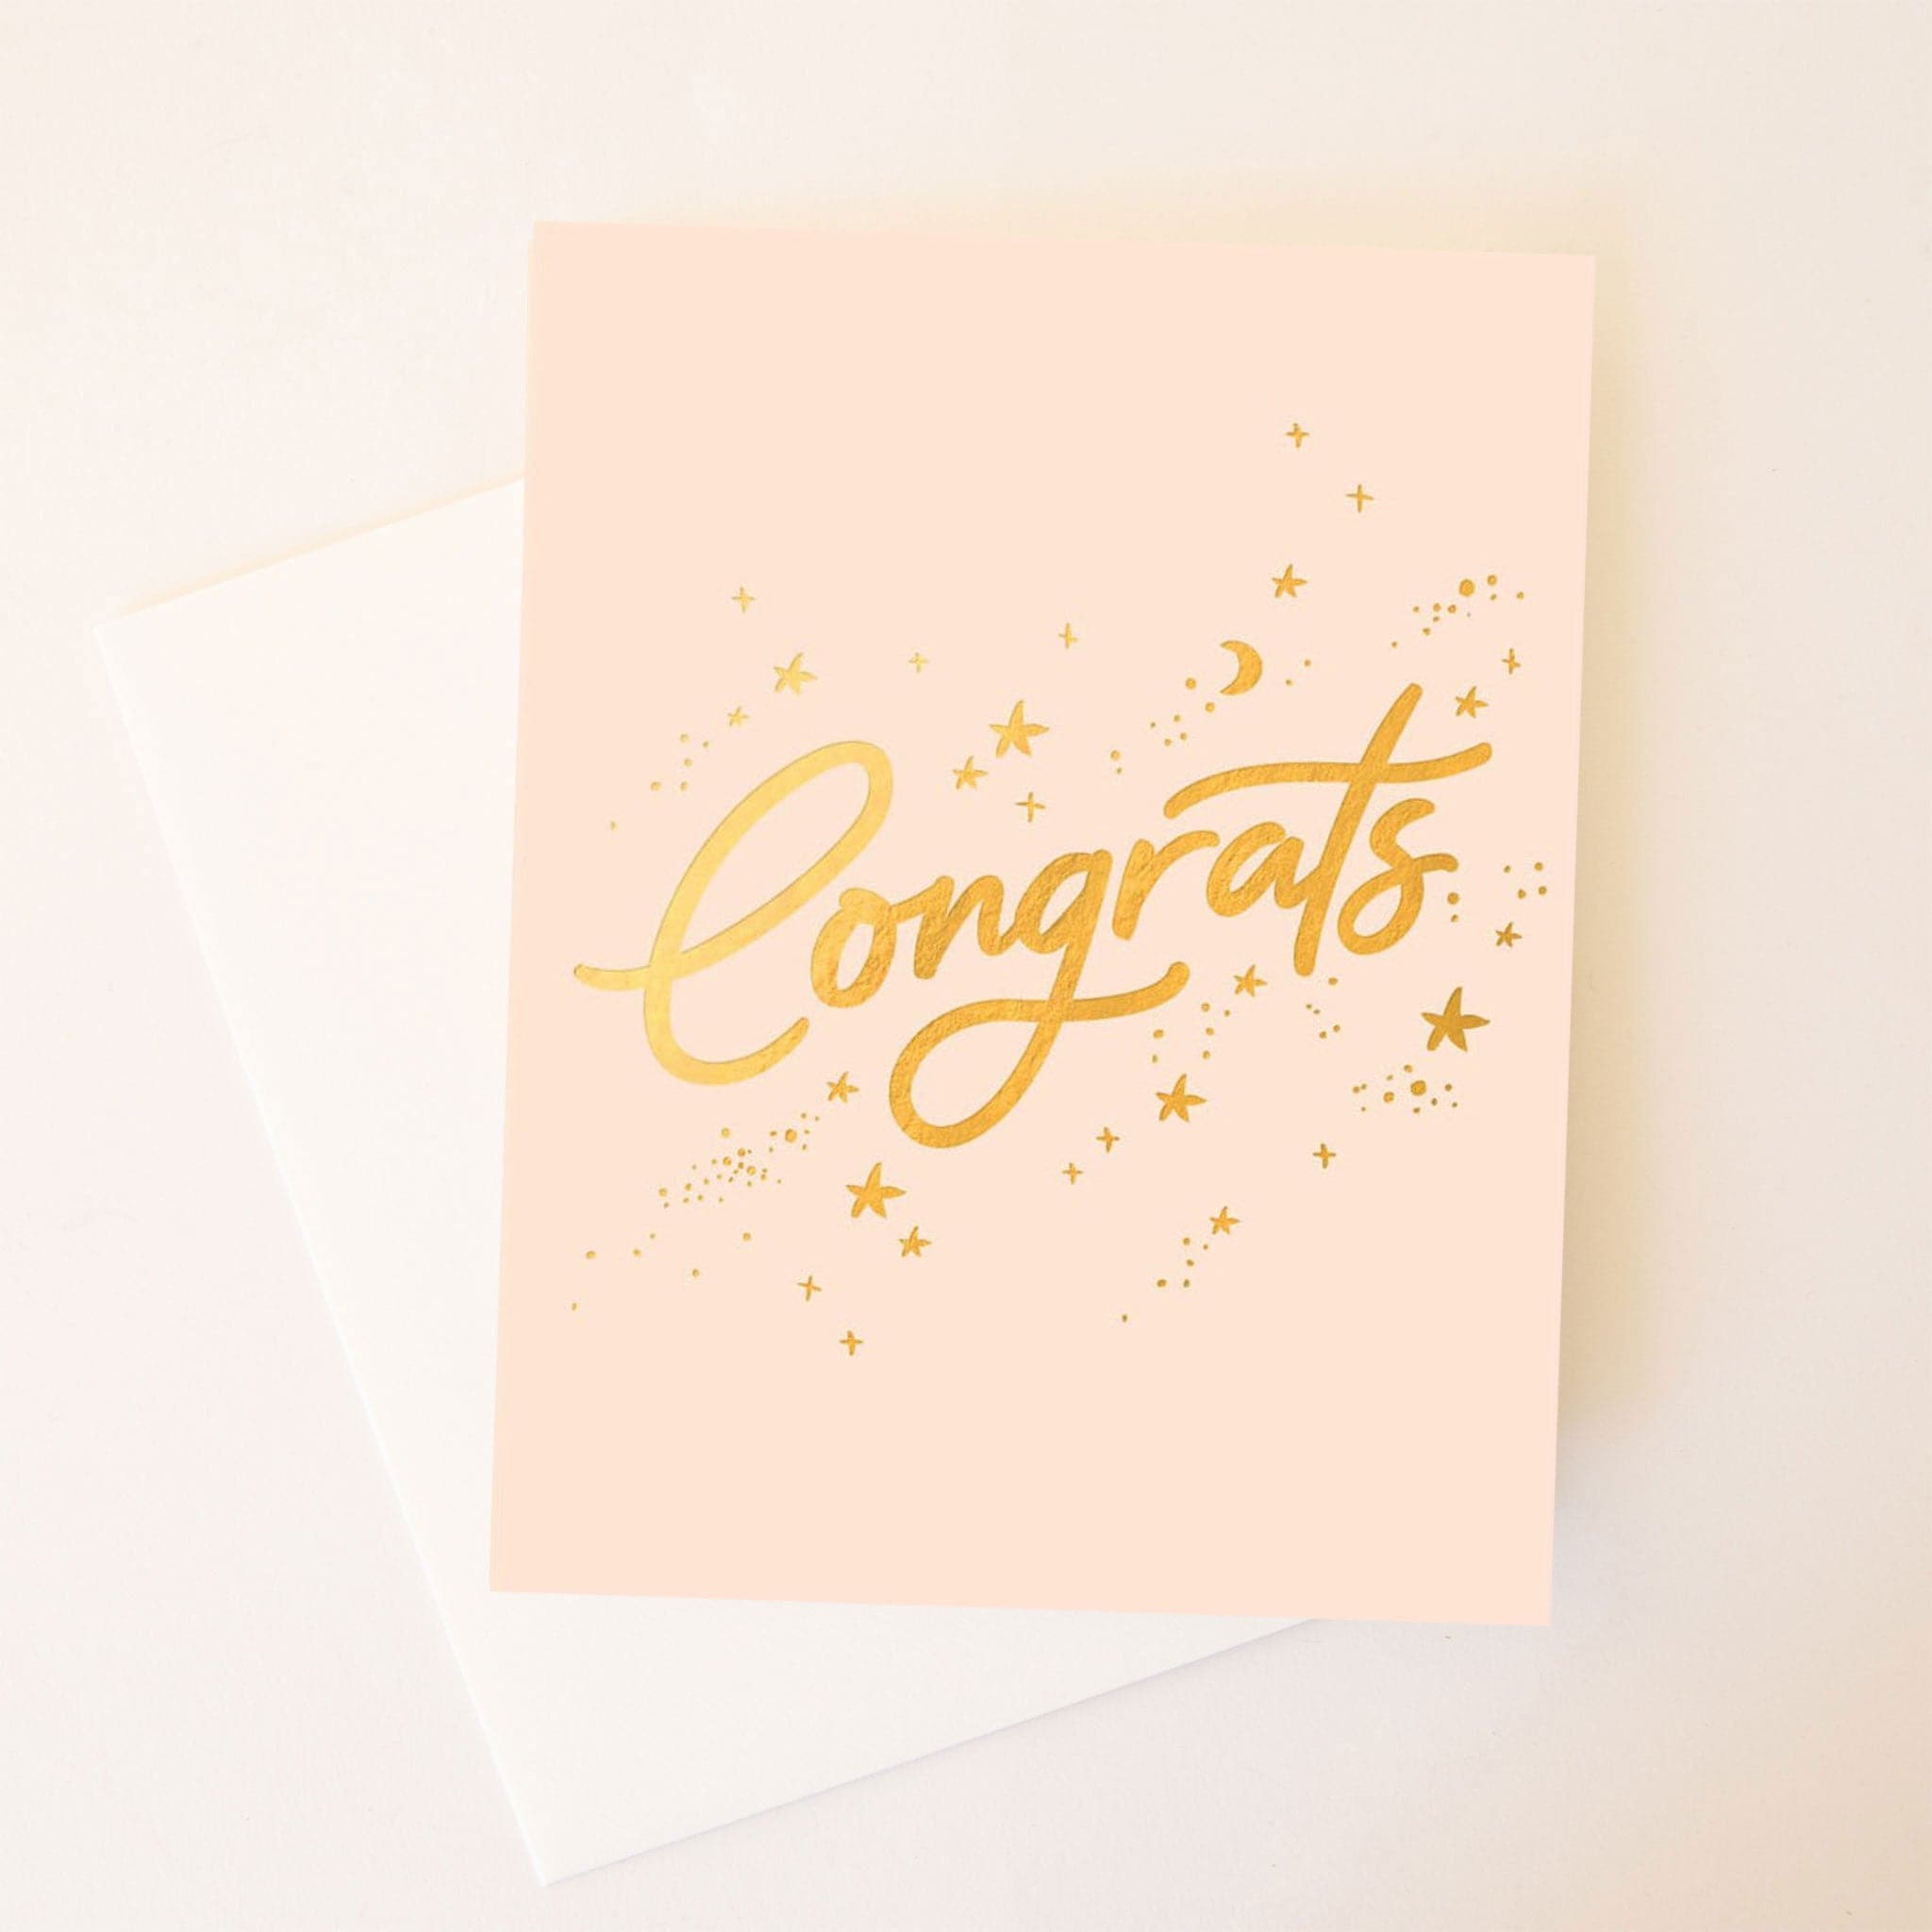 A light pink card with gold cursive writing on the front that says, &quot;Congrats&quot; along with small stars and moons around the word.